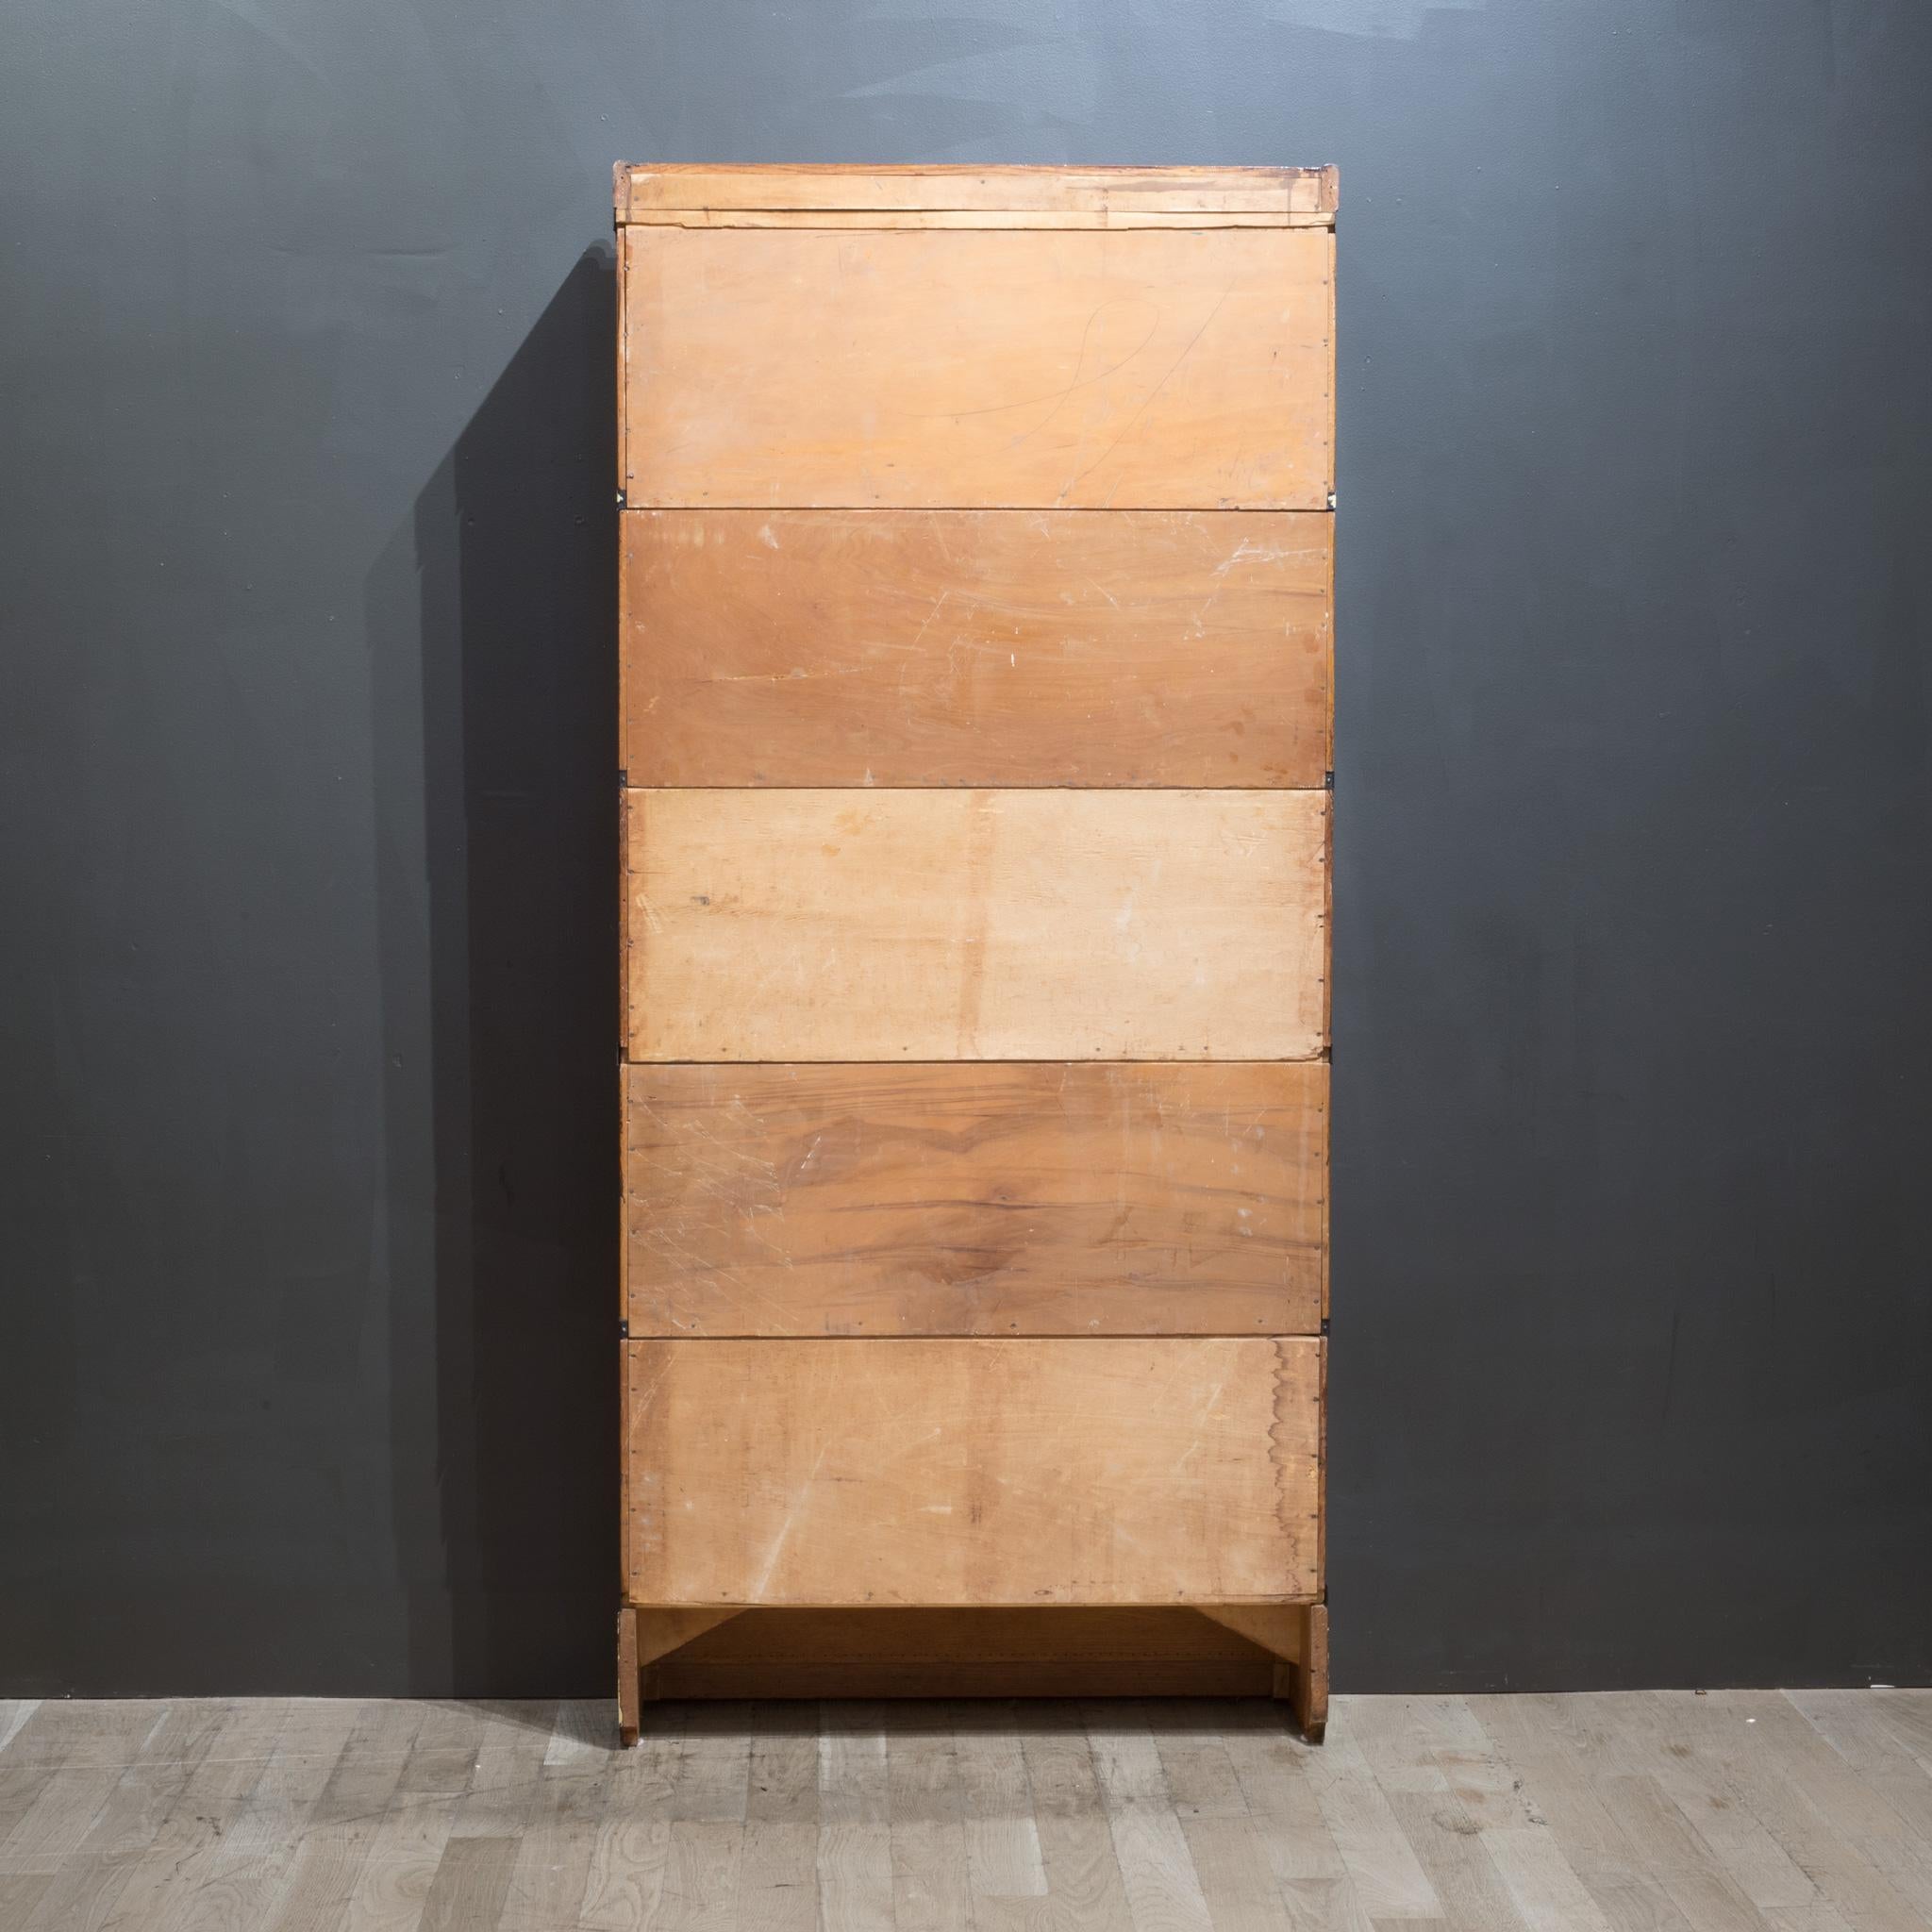 Early 20th C. Globe-Wernicke 5 Stack Lawyer's Bookcase c.1890 For Sale 6